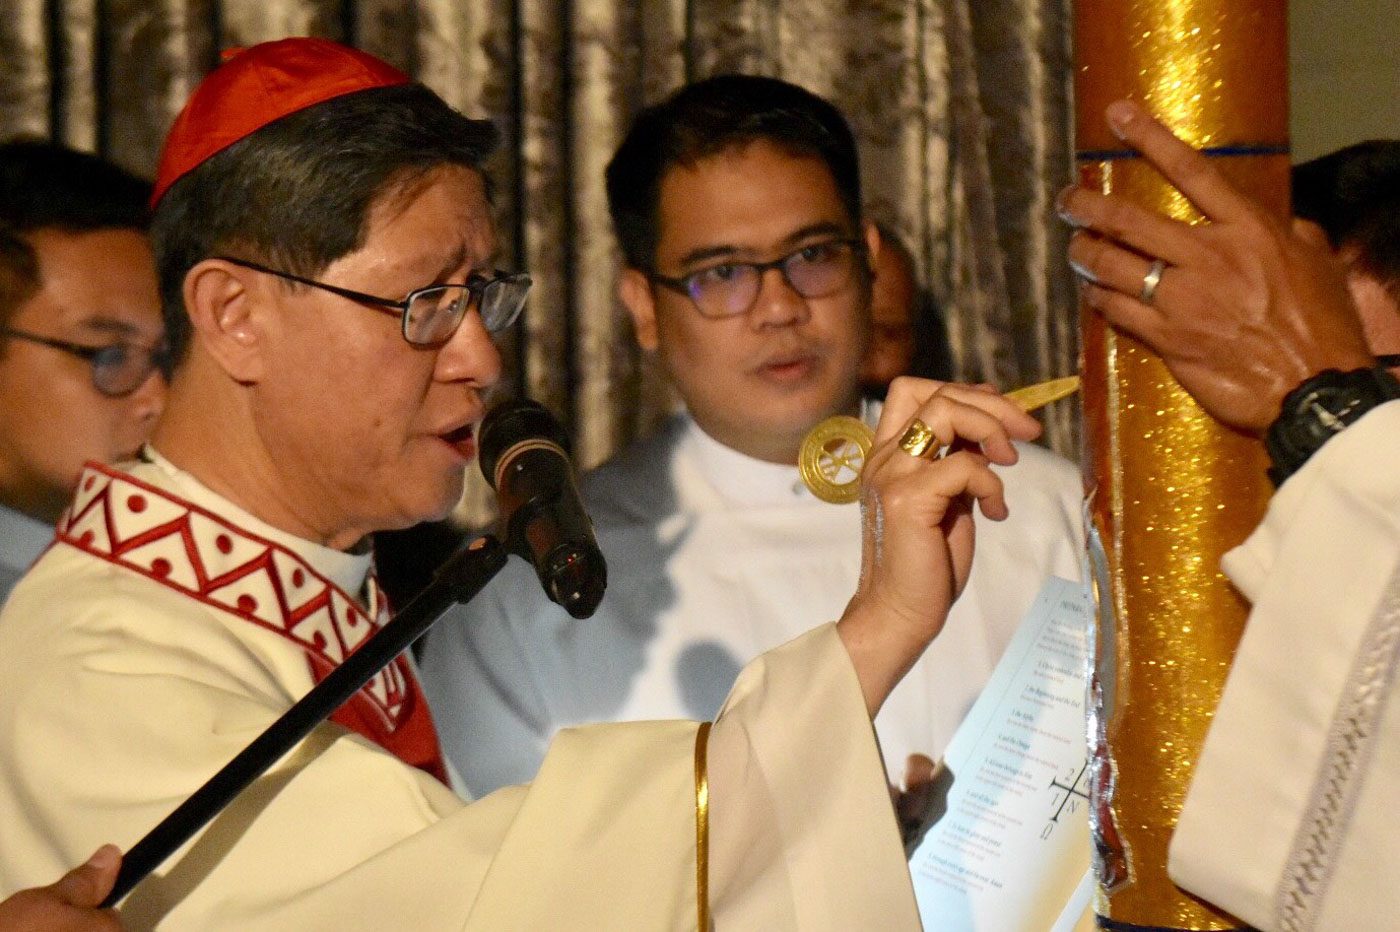 Manila Archbishop Luis Antonio Cardinal Tagle marks the Paschal Candle during the Easter Vigil Mass at the Manila Cathedral on April 20, 2019. Photo by Angie de Silva/Rappler 